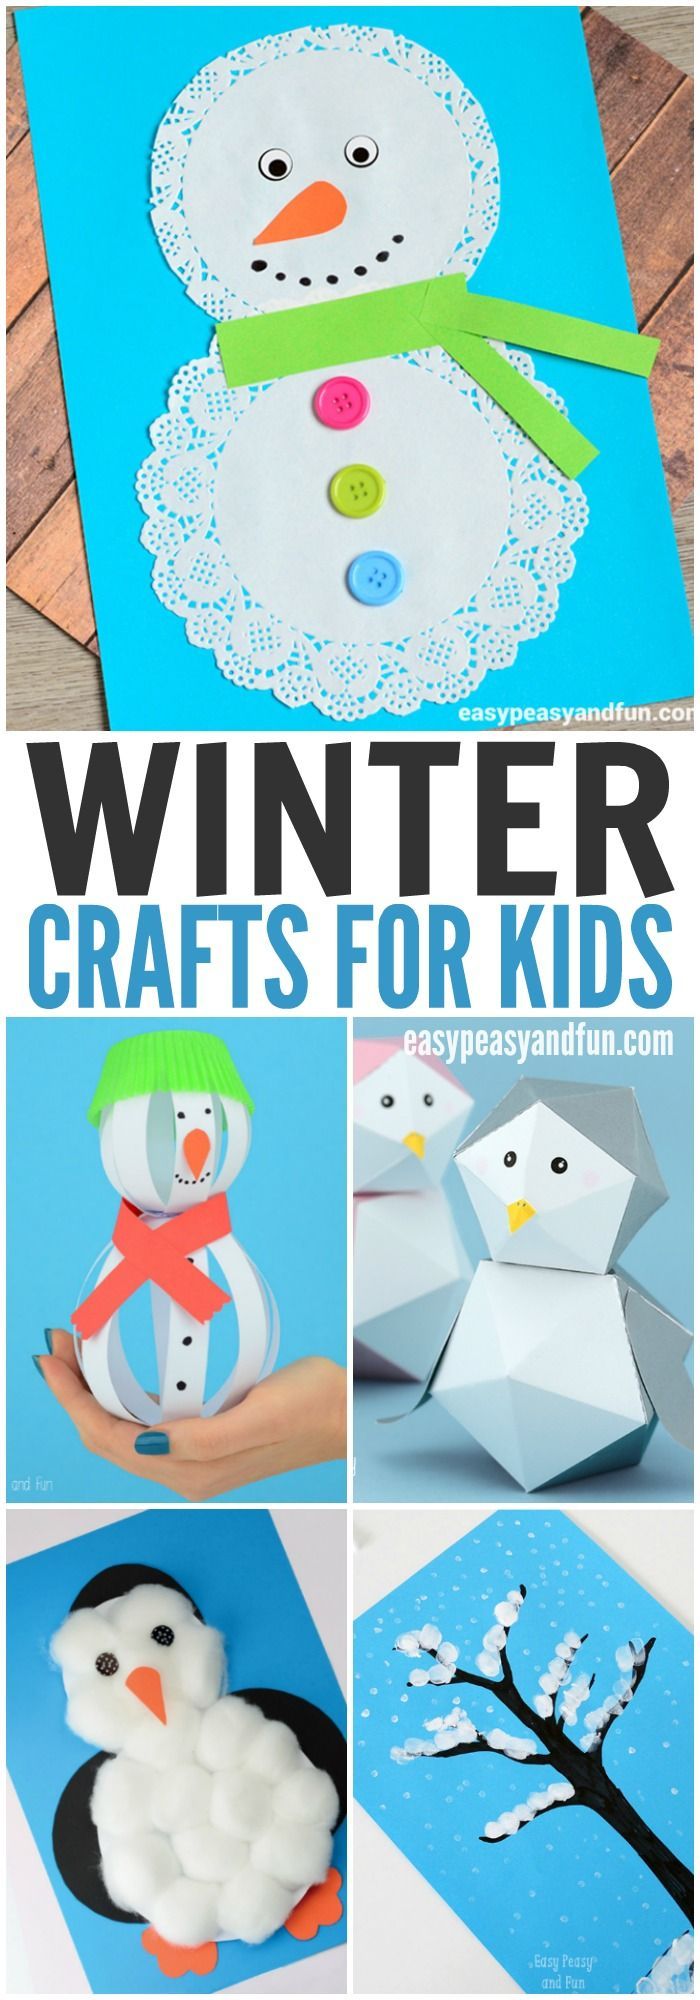 Need some winter crafts to fill the cold Christmas break? Check out this fun list!